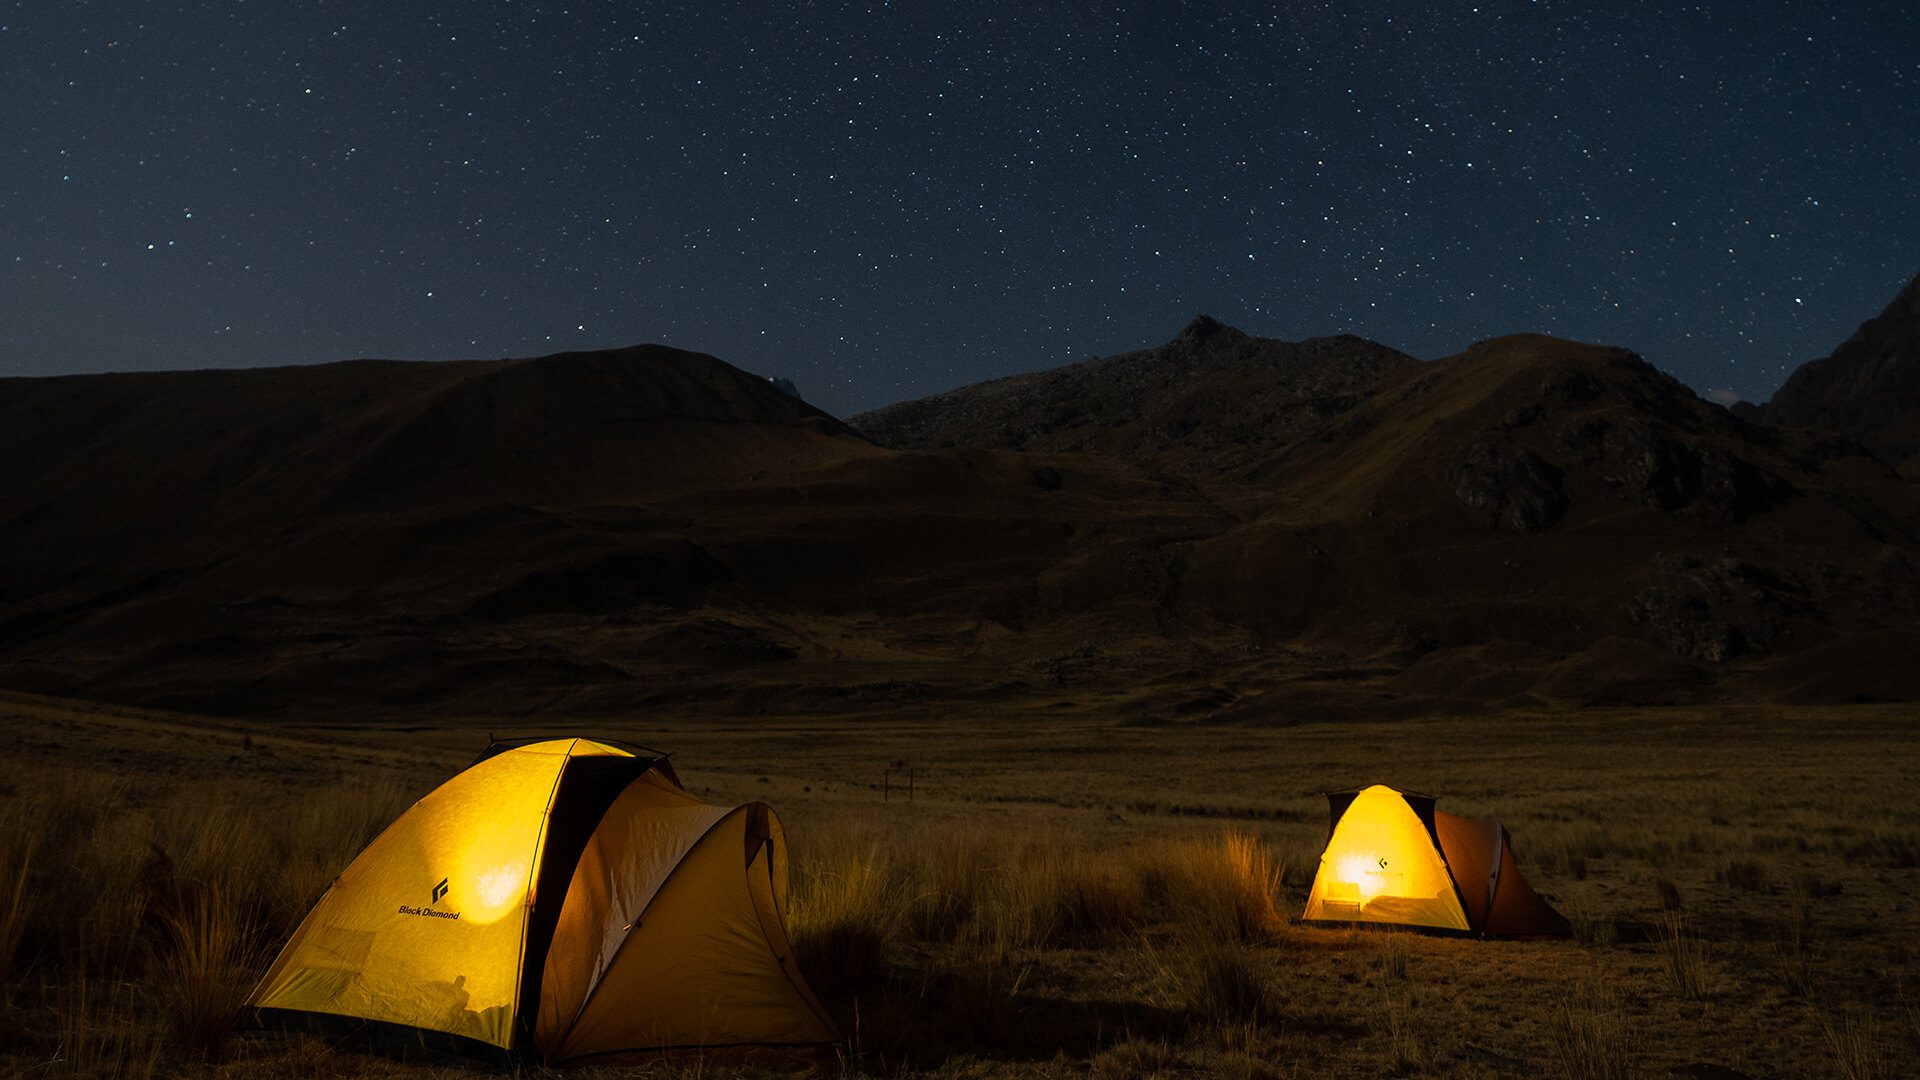 Lit-up tents at night on a starry night in the Andes | Llama Trek Olleros to Chavin with RESPONSible Travel Peru | Photo by Bjorn Snelders